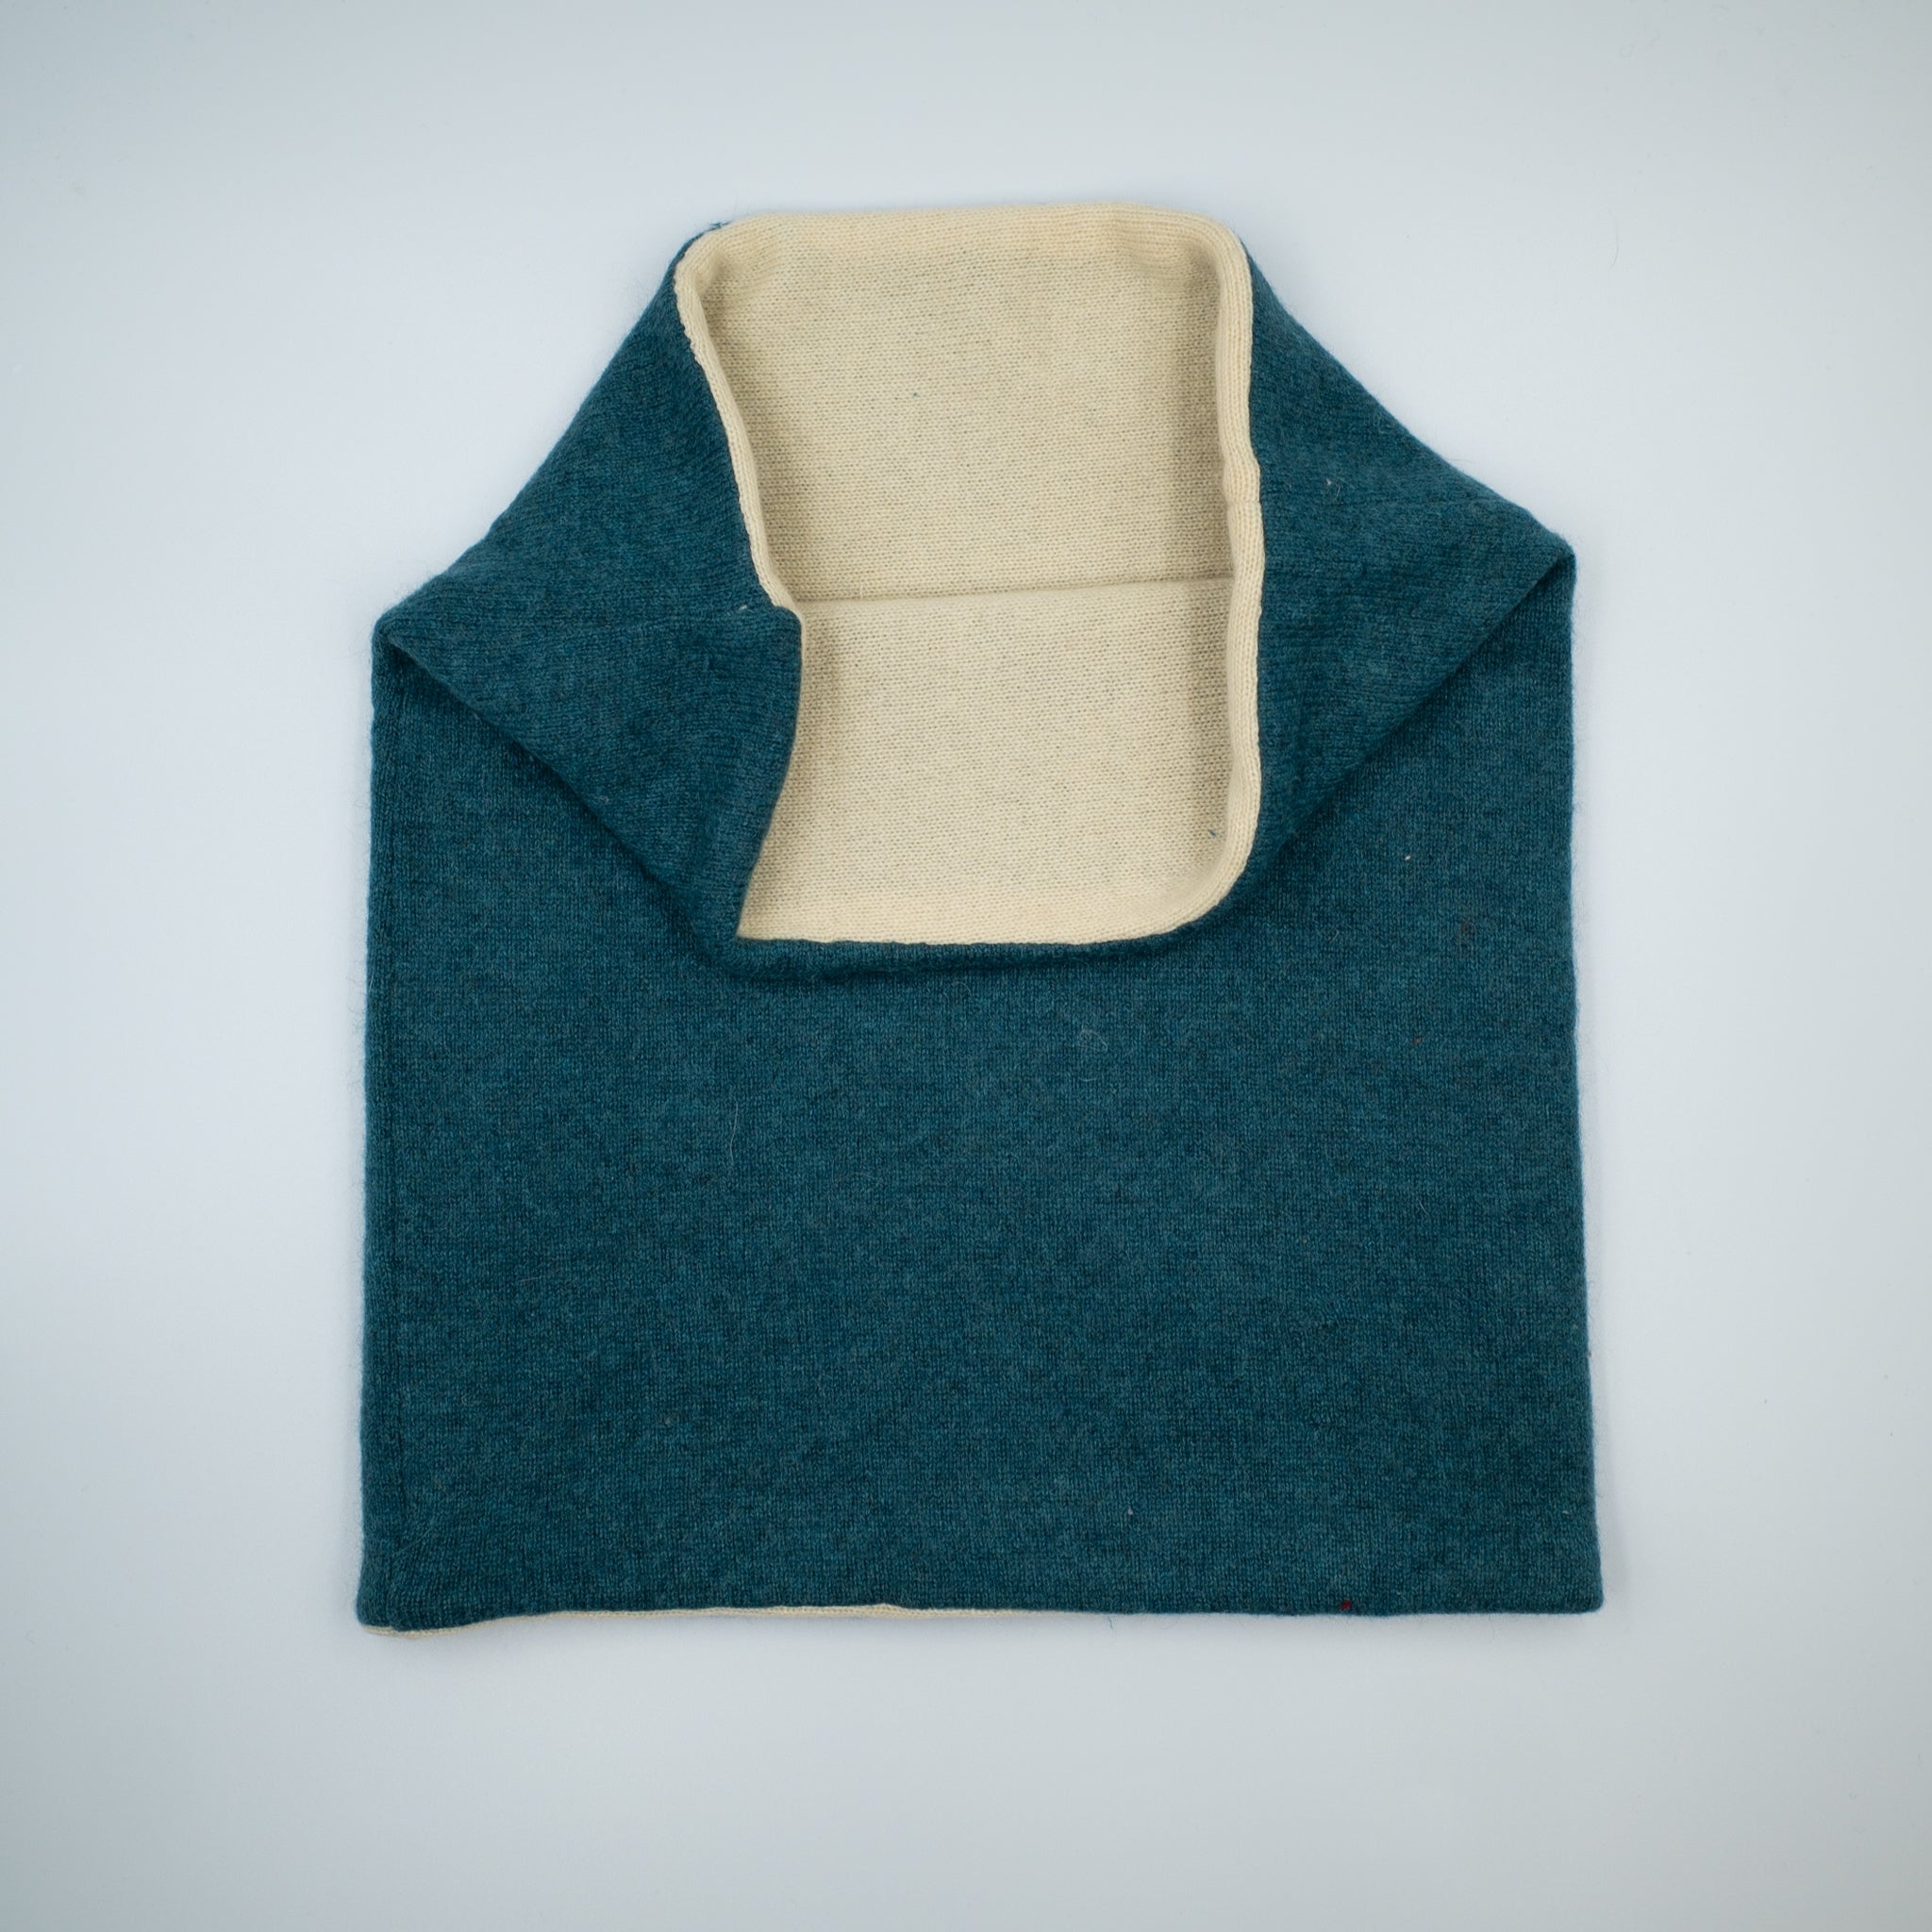 Peacock Blue and Cream Luxury Double Layered Snood